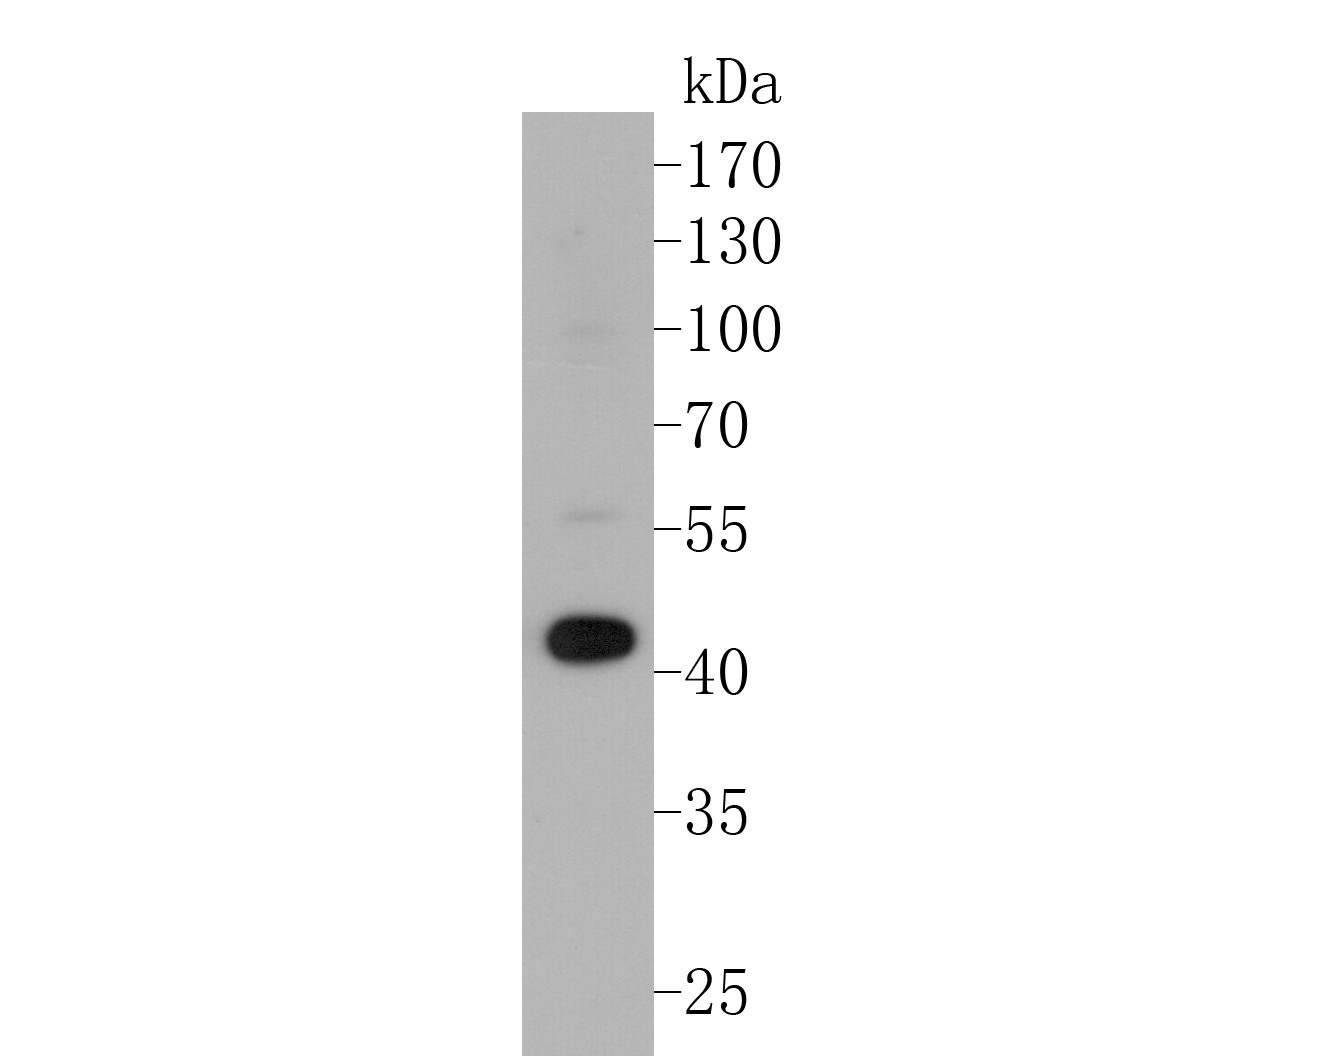 Western blot analysis of ACADL on SH-SY5Y cell lysate. Proteins were transferred to a PVDF membrane and blocked with 5% BSA in PBS for 1 hour at room temperature. The primary antibody (ER1901-11, 1/5000) was used in 5% BSA at room temperature for 2 hours. Goat Anti-Rabbit IgG - HRP Secondary Antibody (HA1001) at 1:5,000 dilution was used for 1 hour at room temperature.